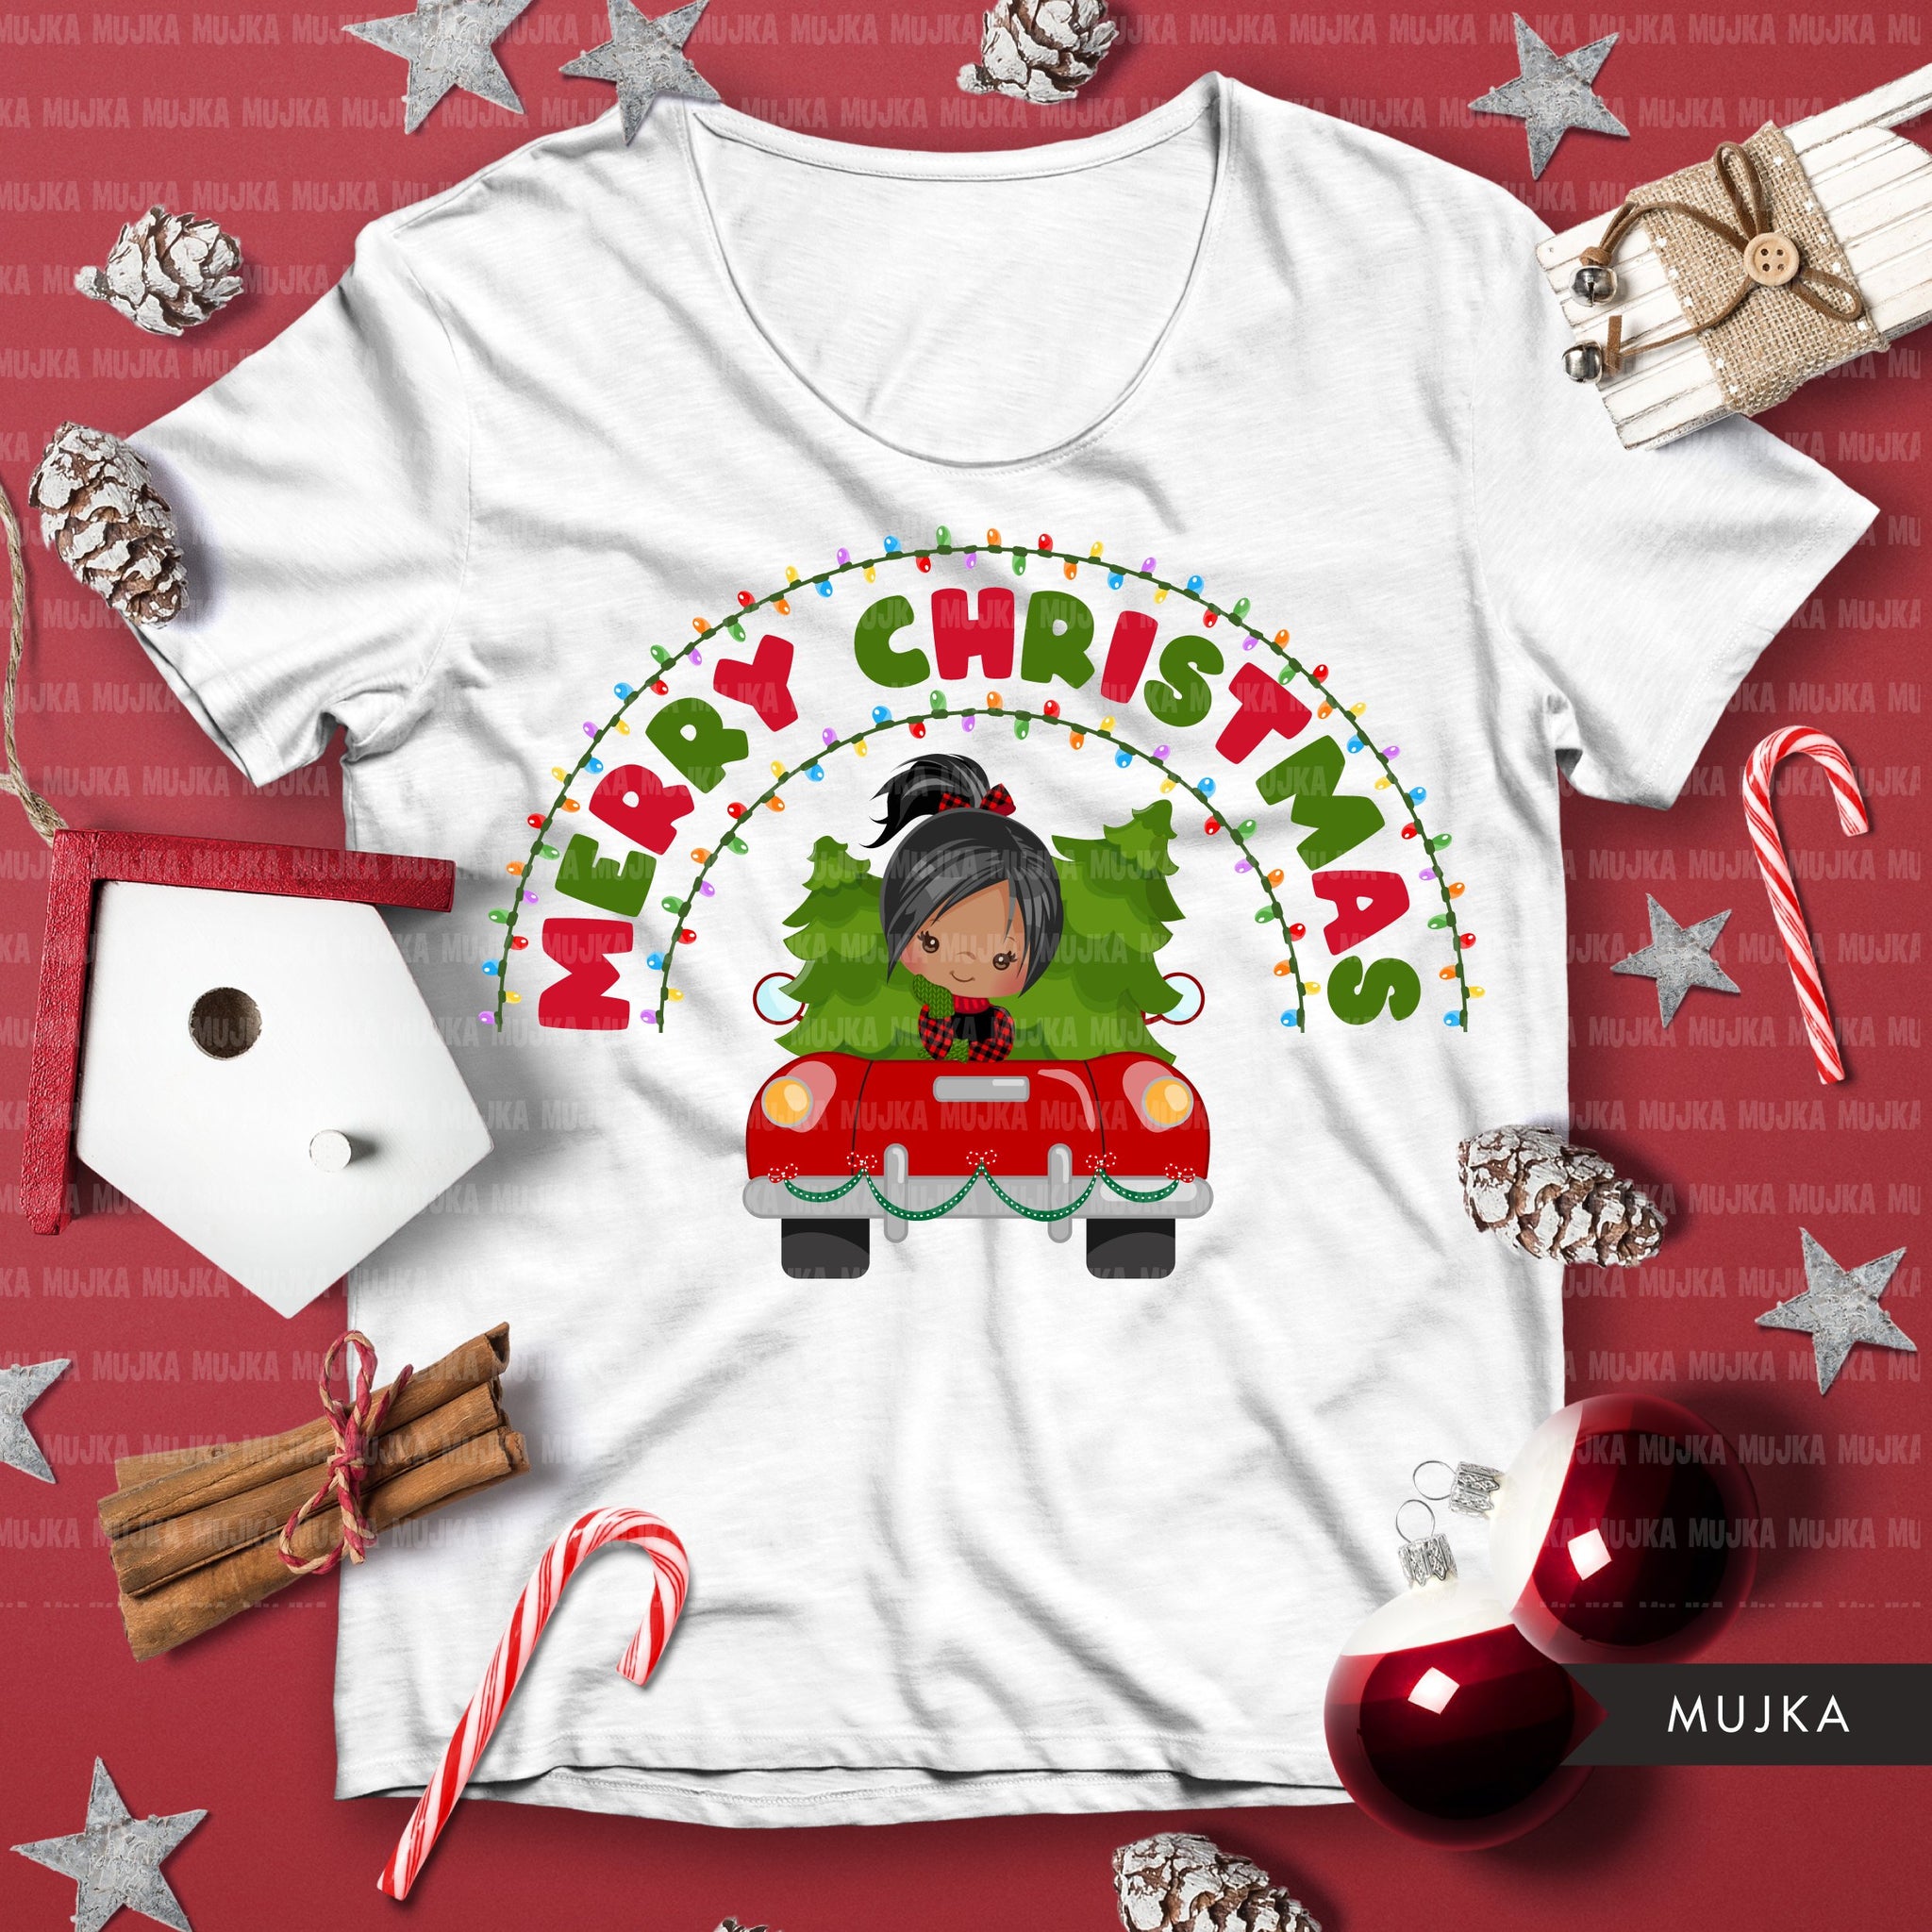 christmas png digital merry christmas red truck htv sublimation image transfer clipart t-shirt girl